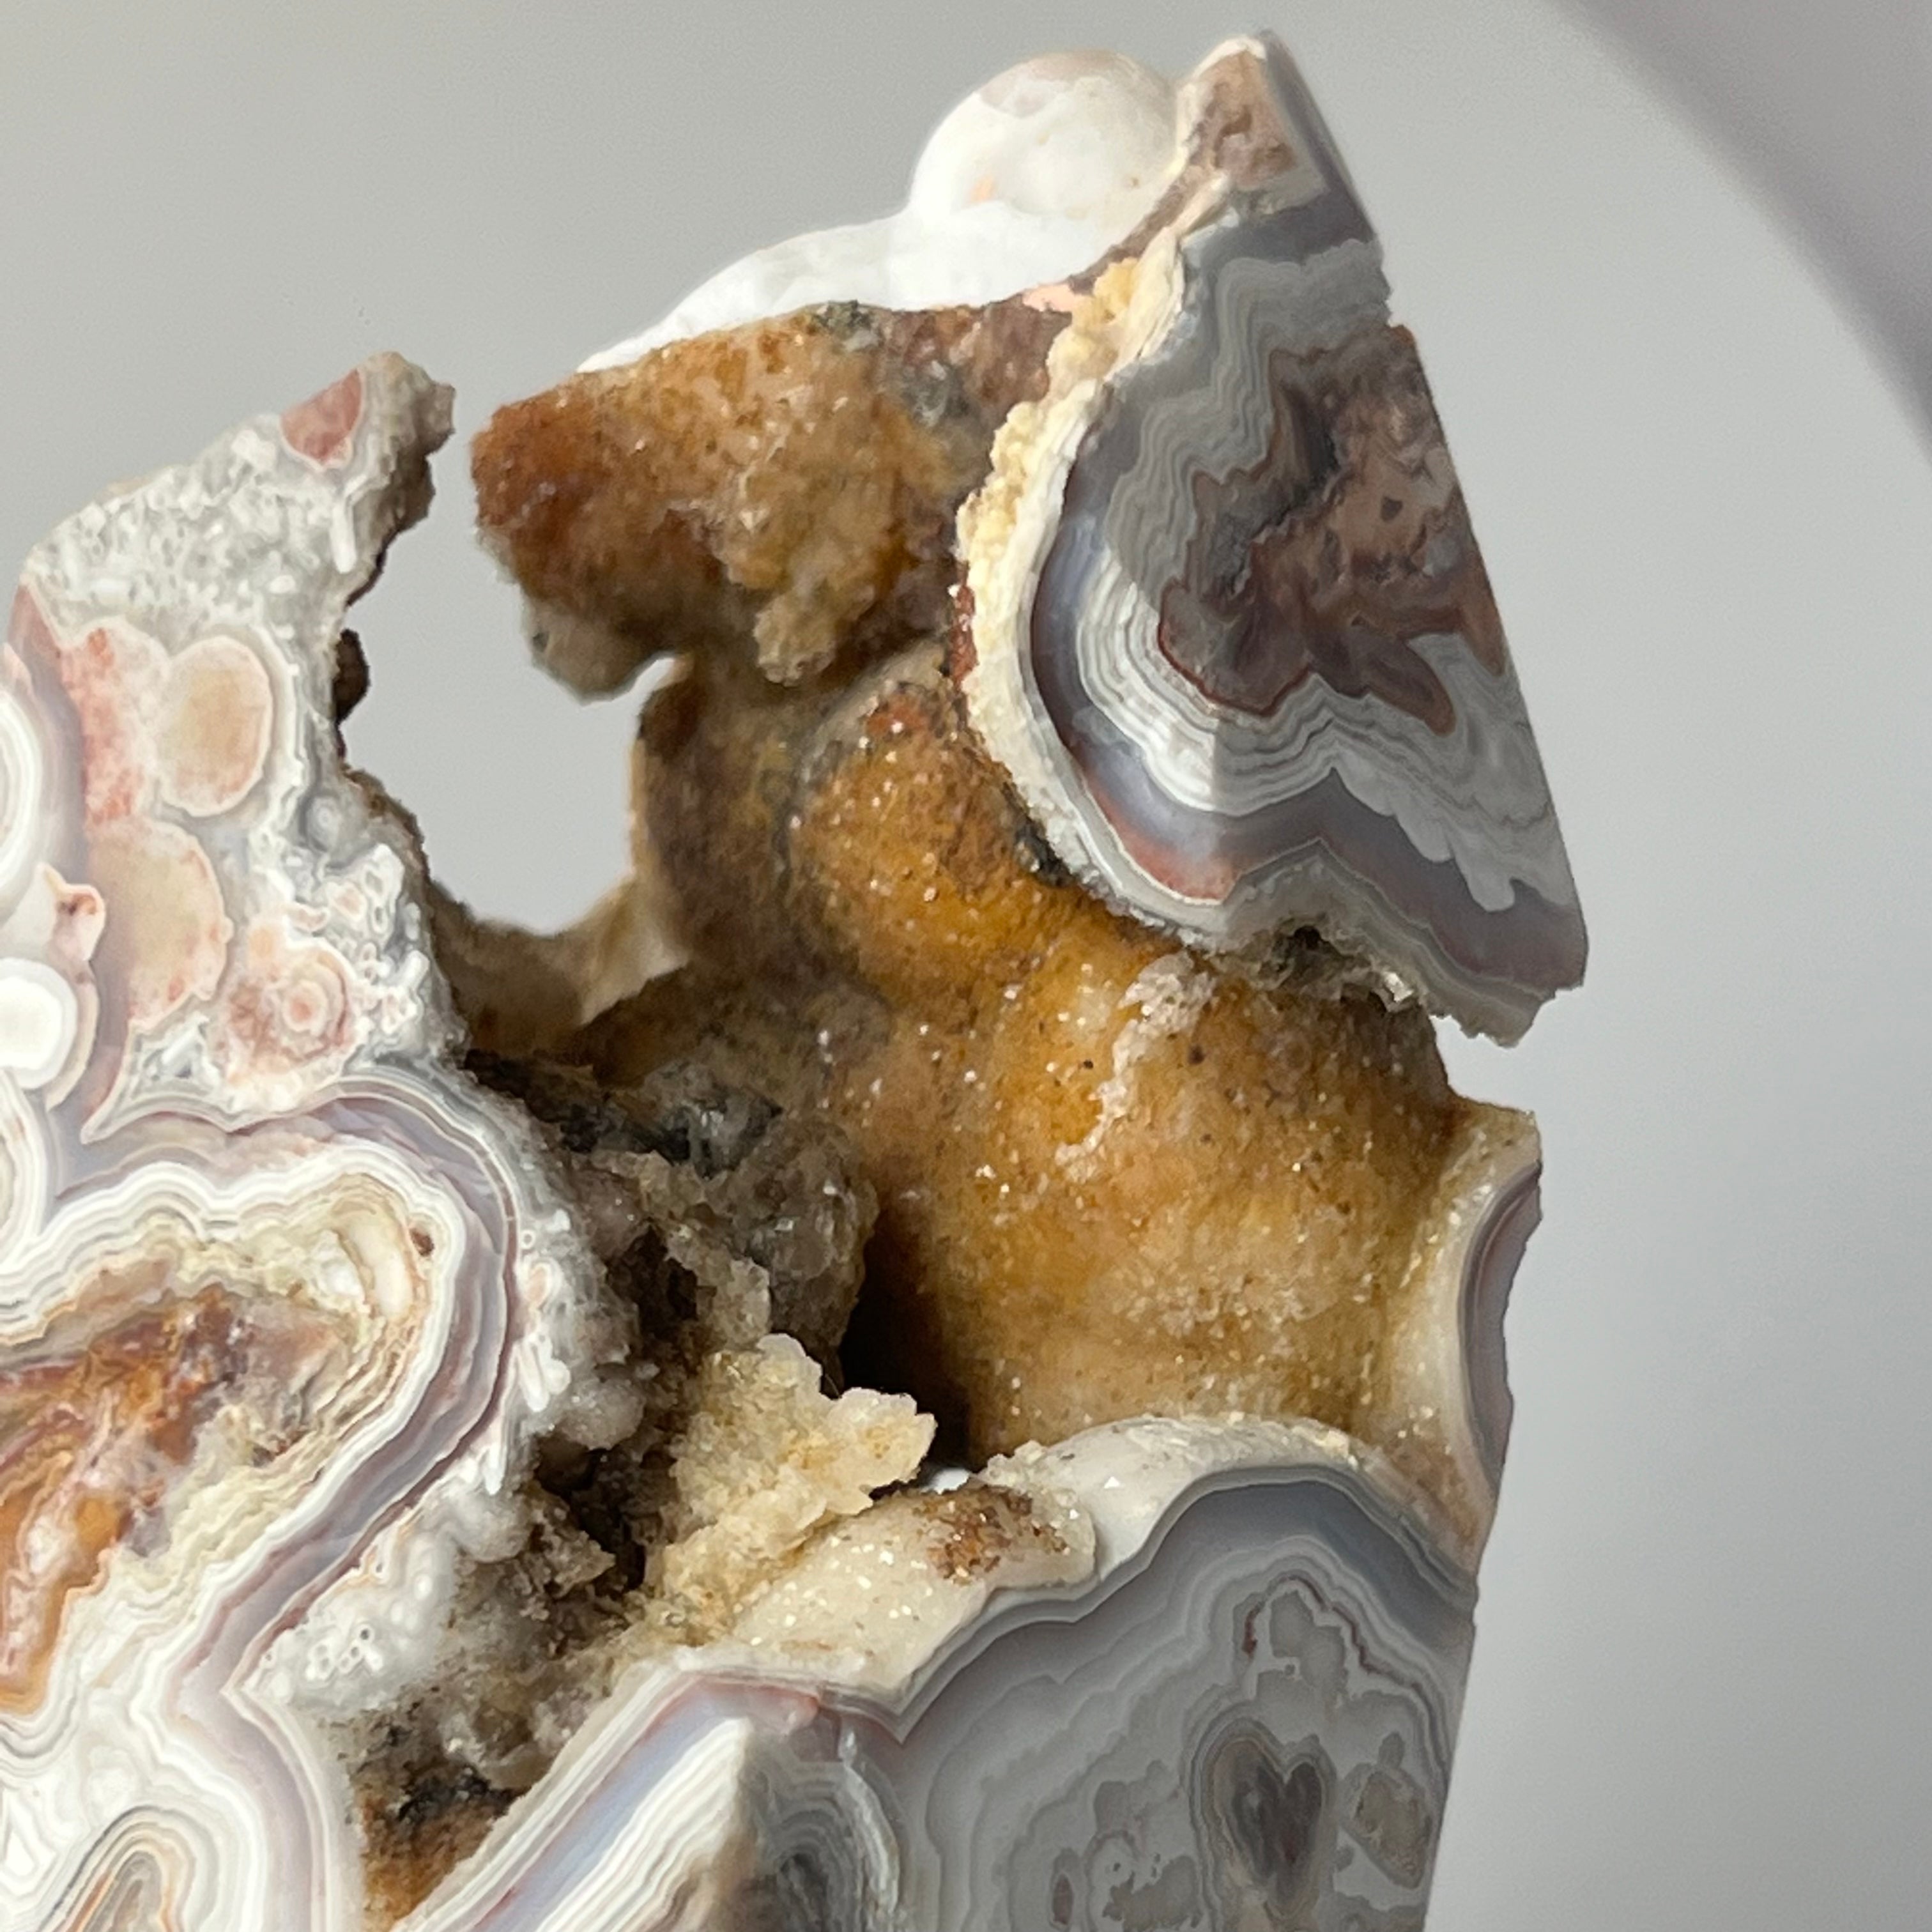 Crazy Lace Agate/ Mexican Agate